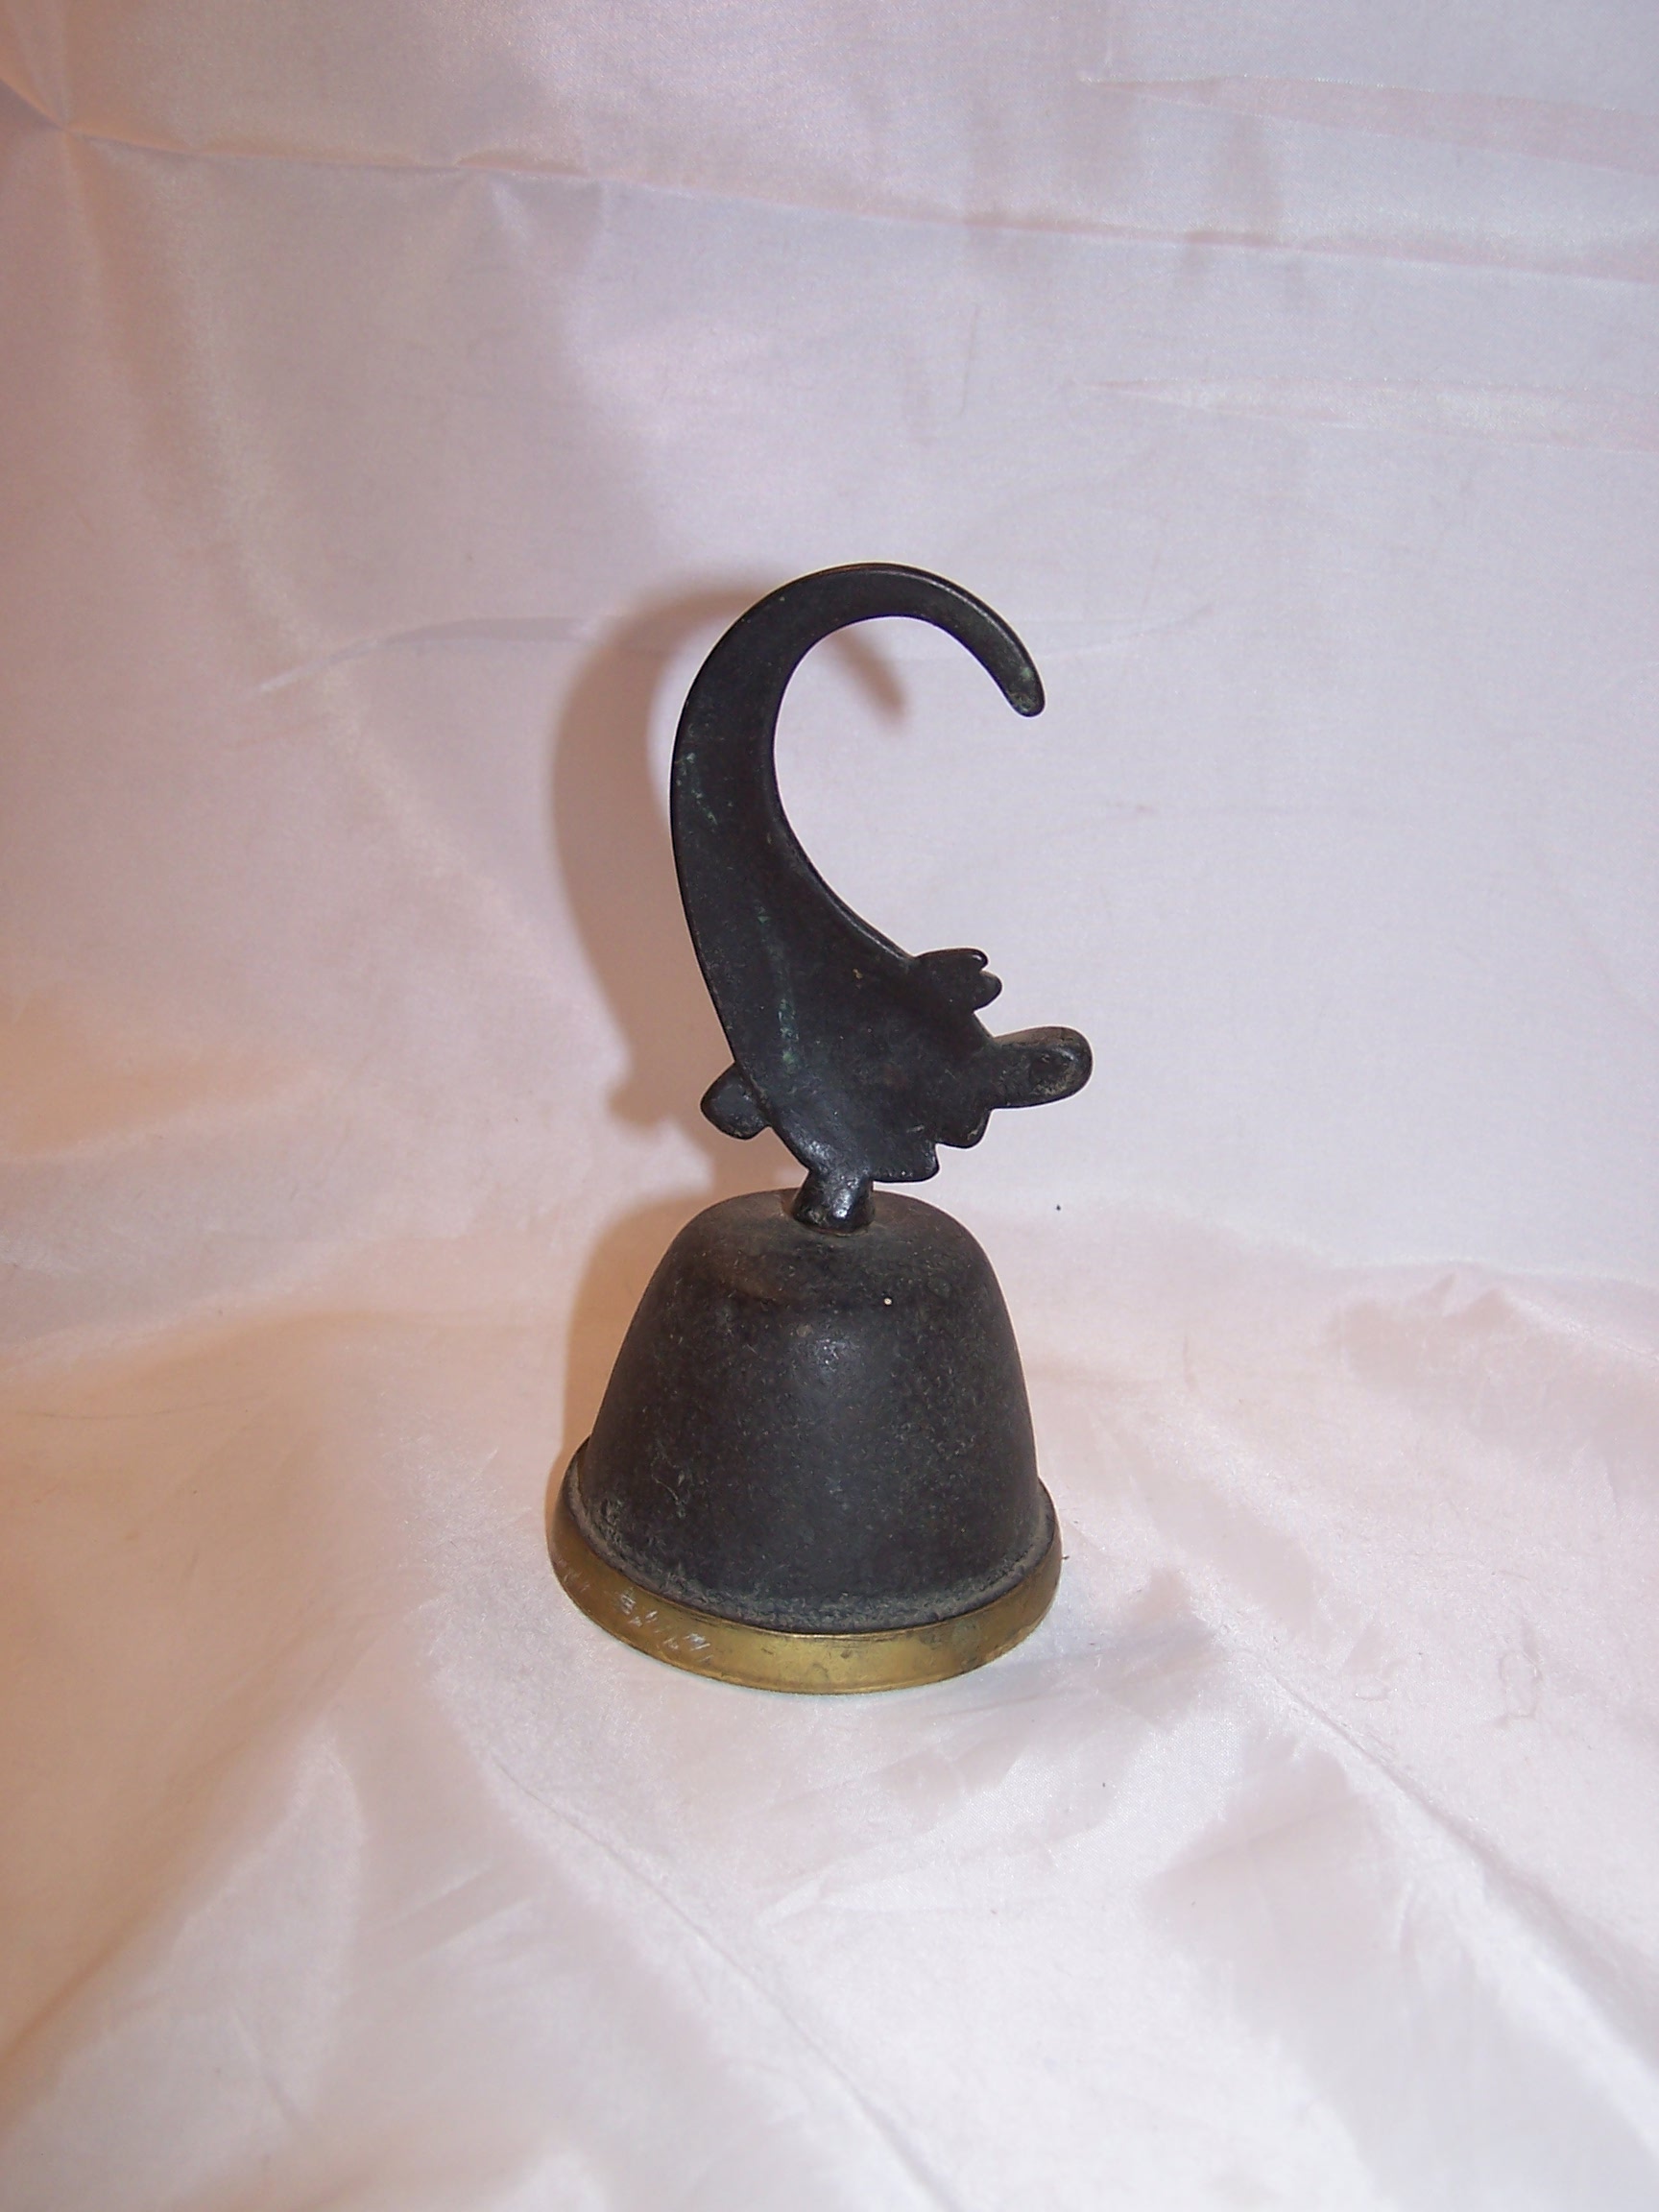 Image 3 of Elf Bell with Curled Tip Cap, Solid Brass, Patina, Vintage